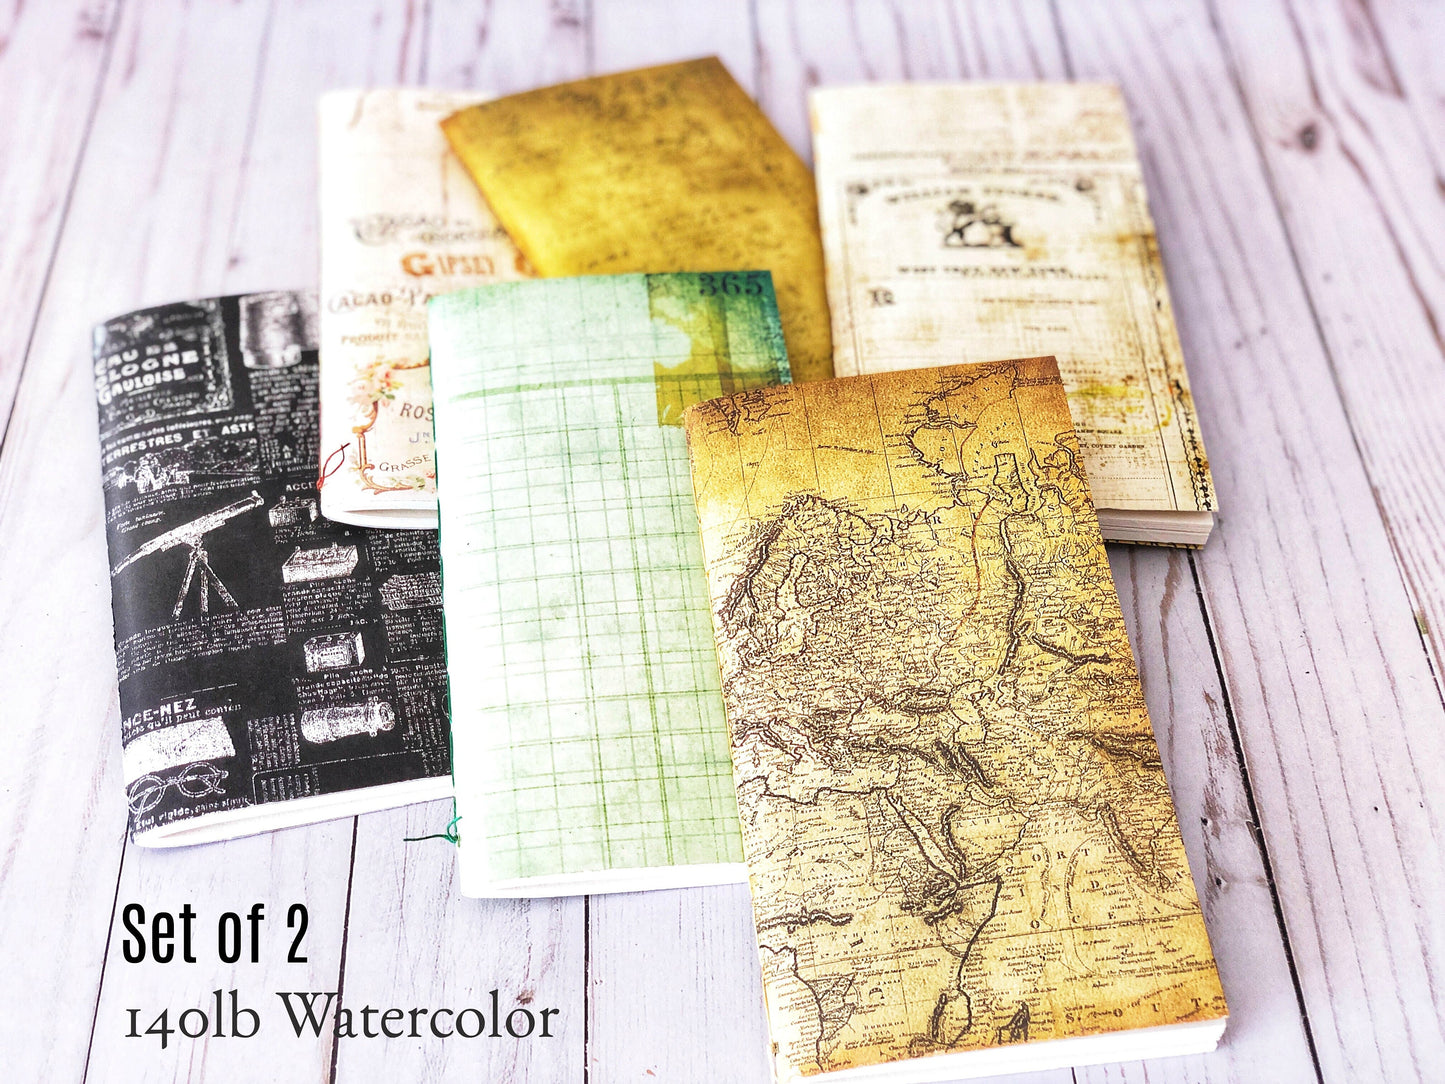 Set of 2 Watercolor Journals with 300gsm Fabriano paper, Travelers Notebook TN Insert Refill, Pocket Journal Sketchbook, Gift for Artists